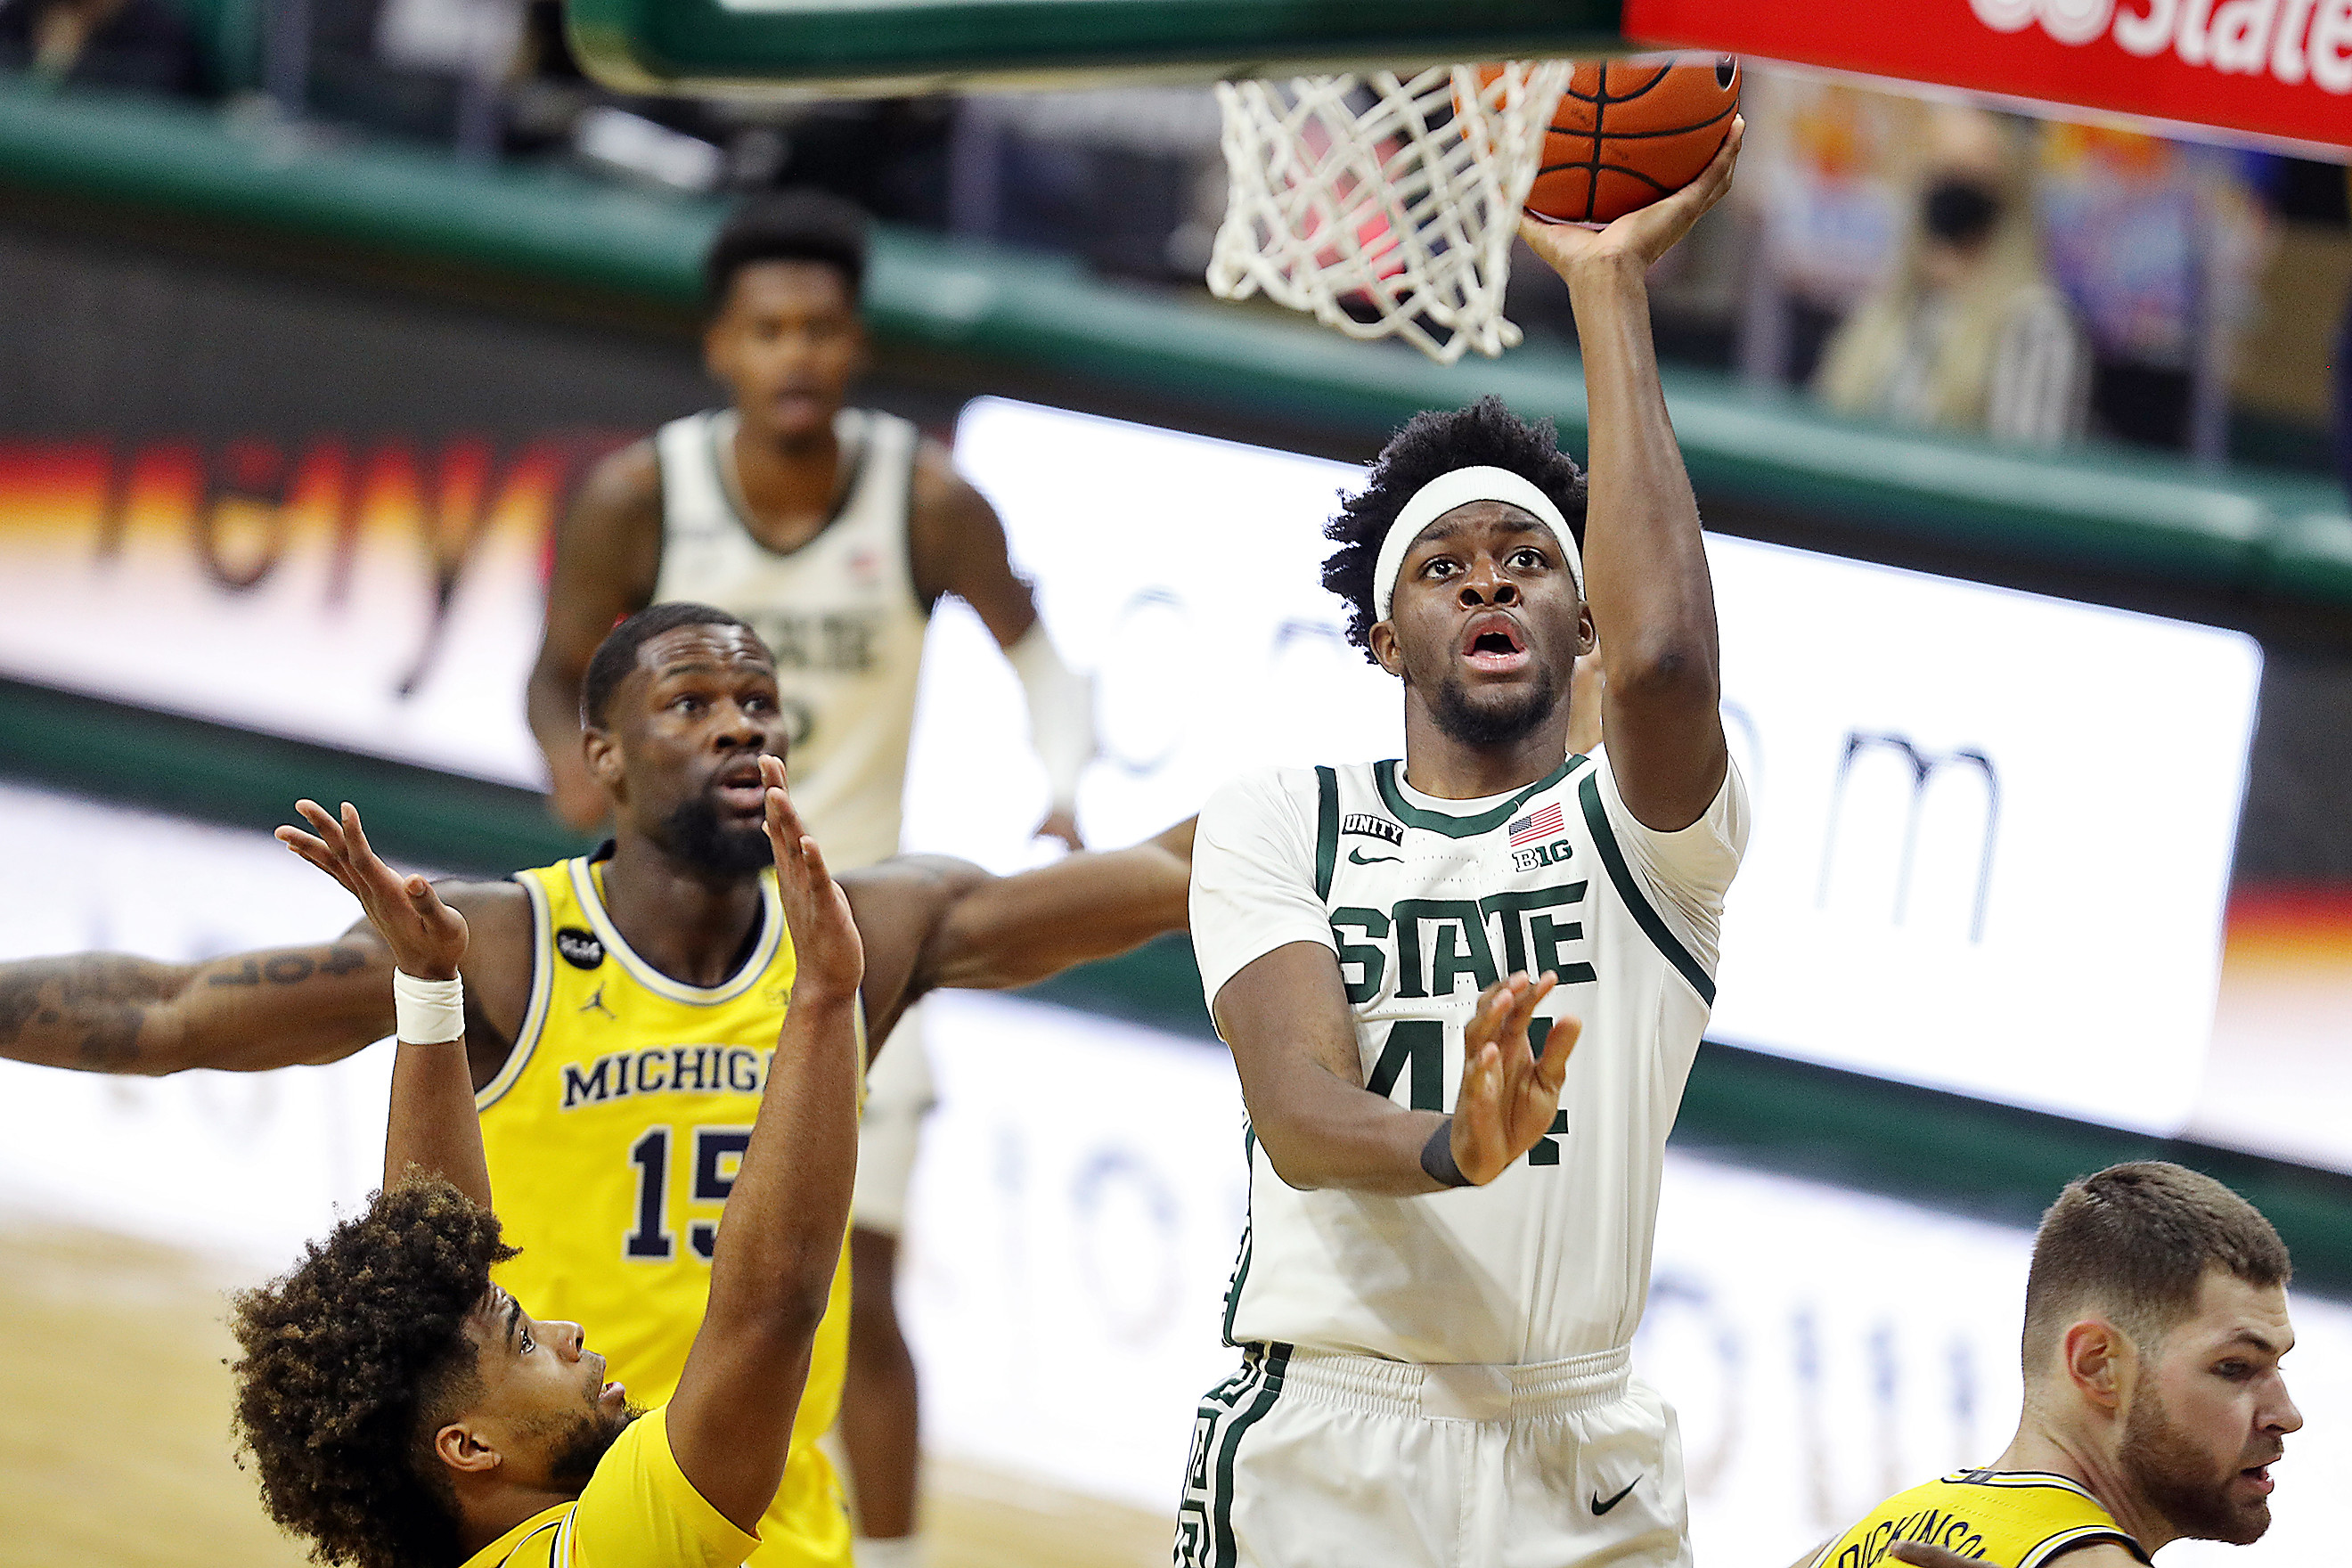 Msu Basketball Schedule 2022 What We Know About Michigan State's Schedule In 2021-22 - Mlive.com